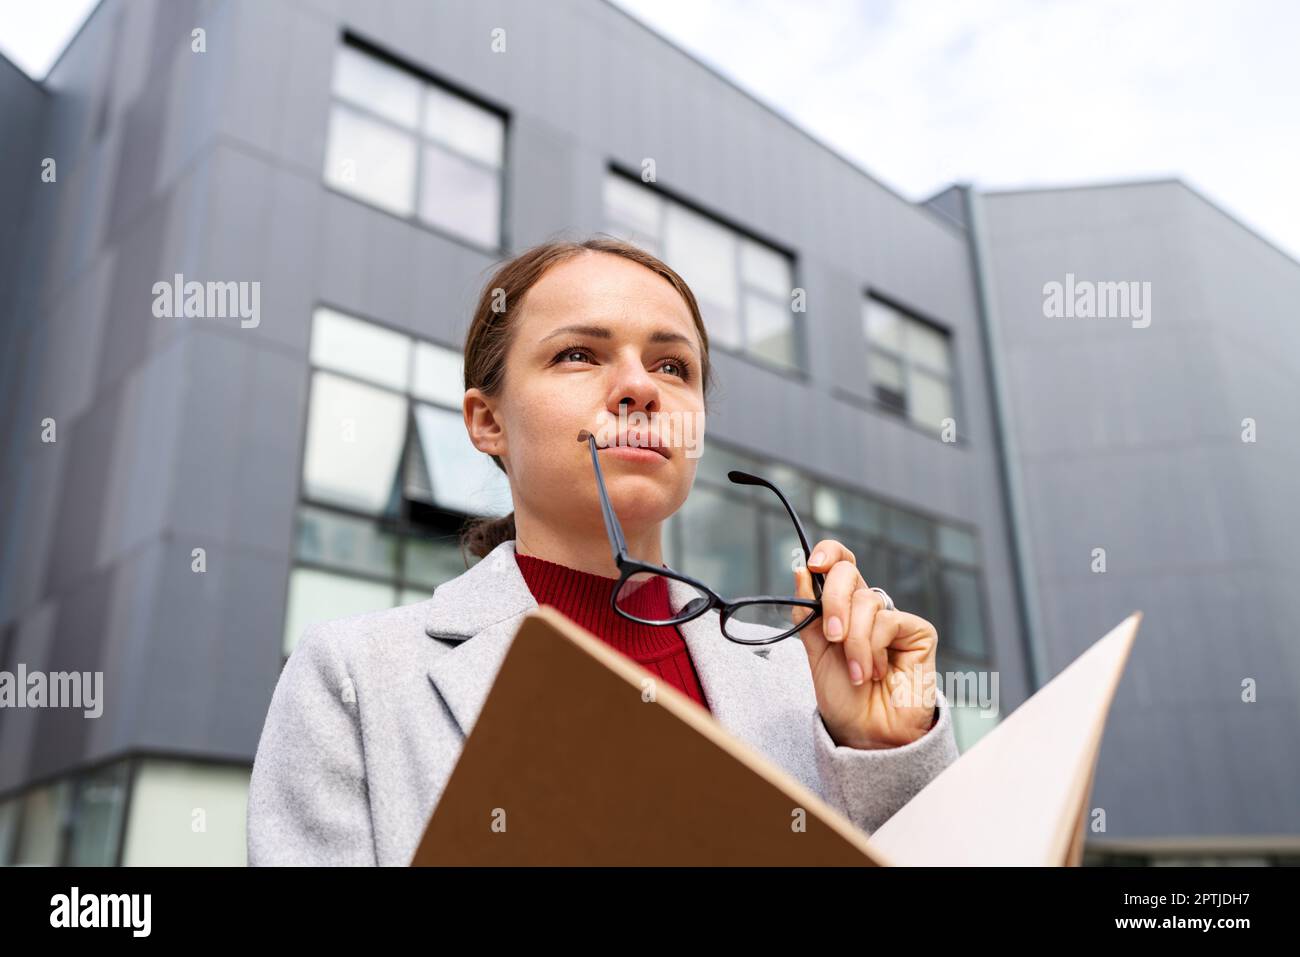 Portrait of young businesswoman with glasses holding folder with documentation in her hands. Stock Photo